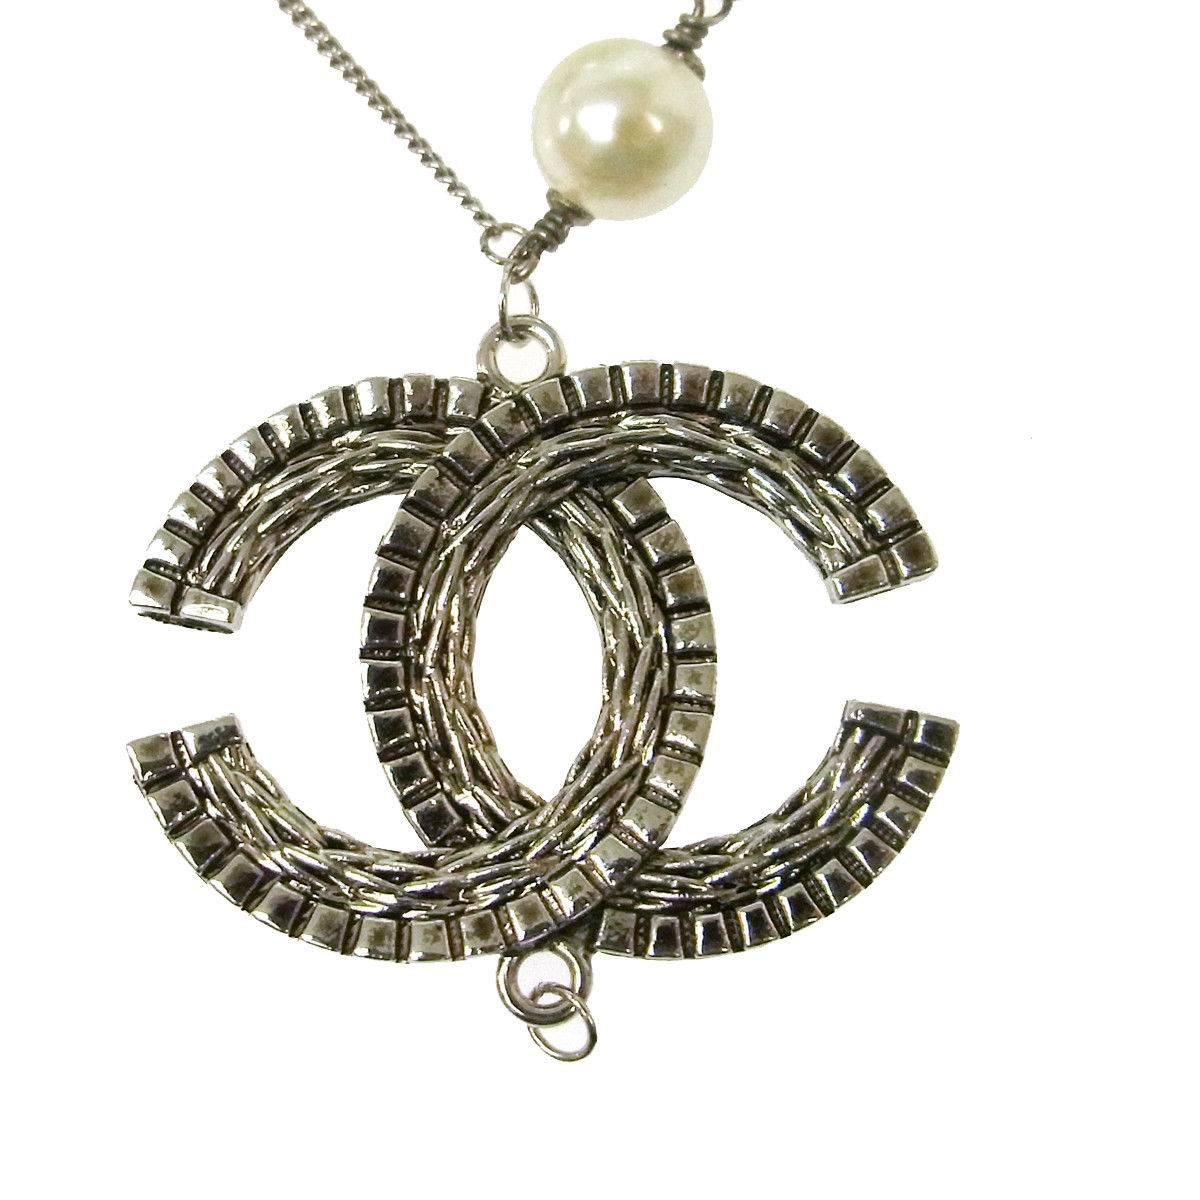 CURATOR'S NOTES

Chanel Gunmetal Silver Pearl Charm Pendant Layer Chain Evening Necklace in Box

Metal
Faux pearl
Lobster claw closure
Made in France
Chain length 33.5